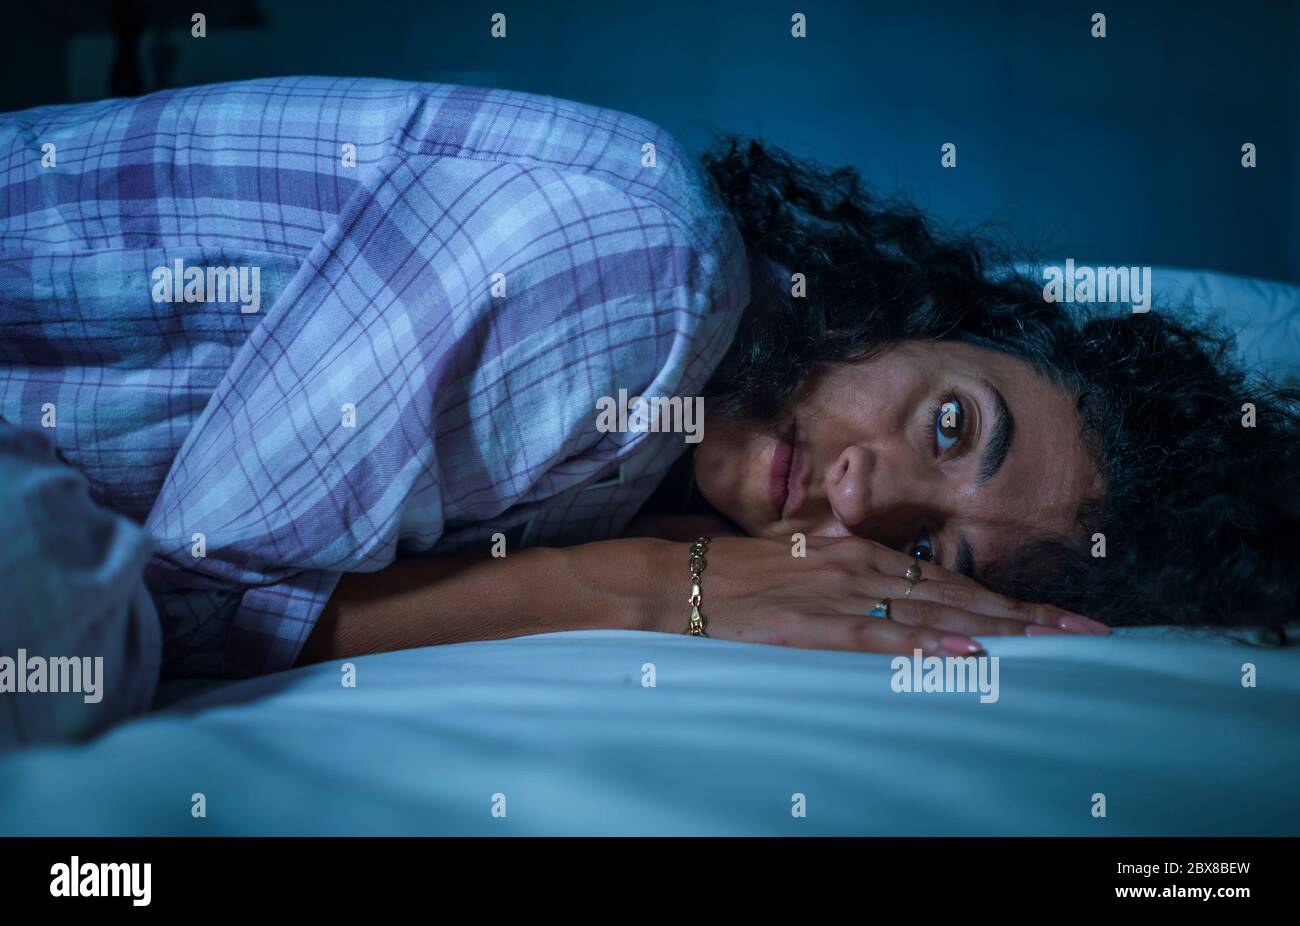 dramatic night lifestyle portrait of young sad and depressed middle eastern woman with curly hair sleepless in bed awake and thoughtful feeling worrie Stock Photo